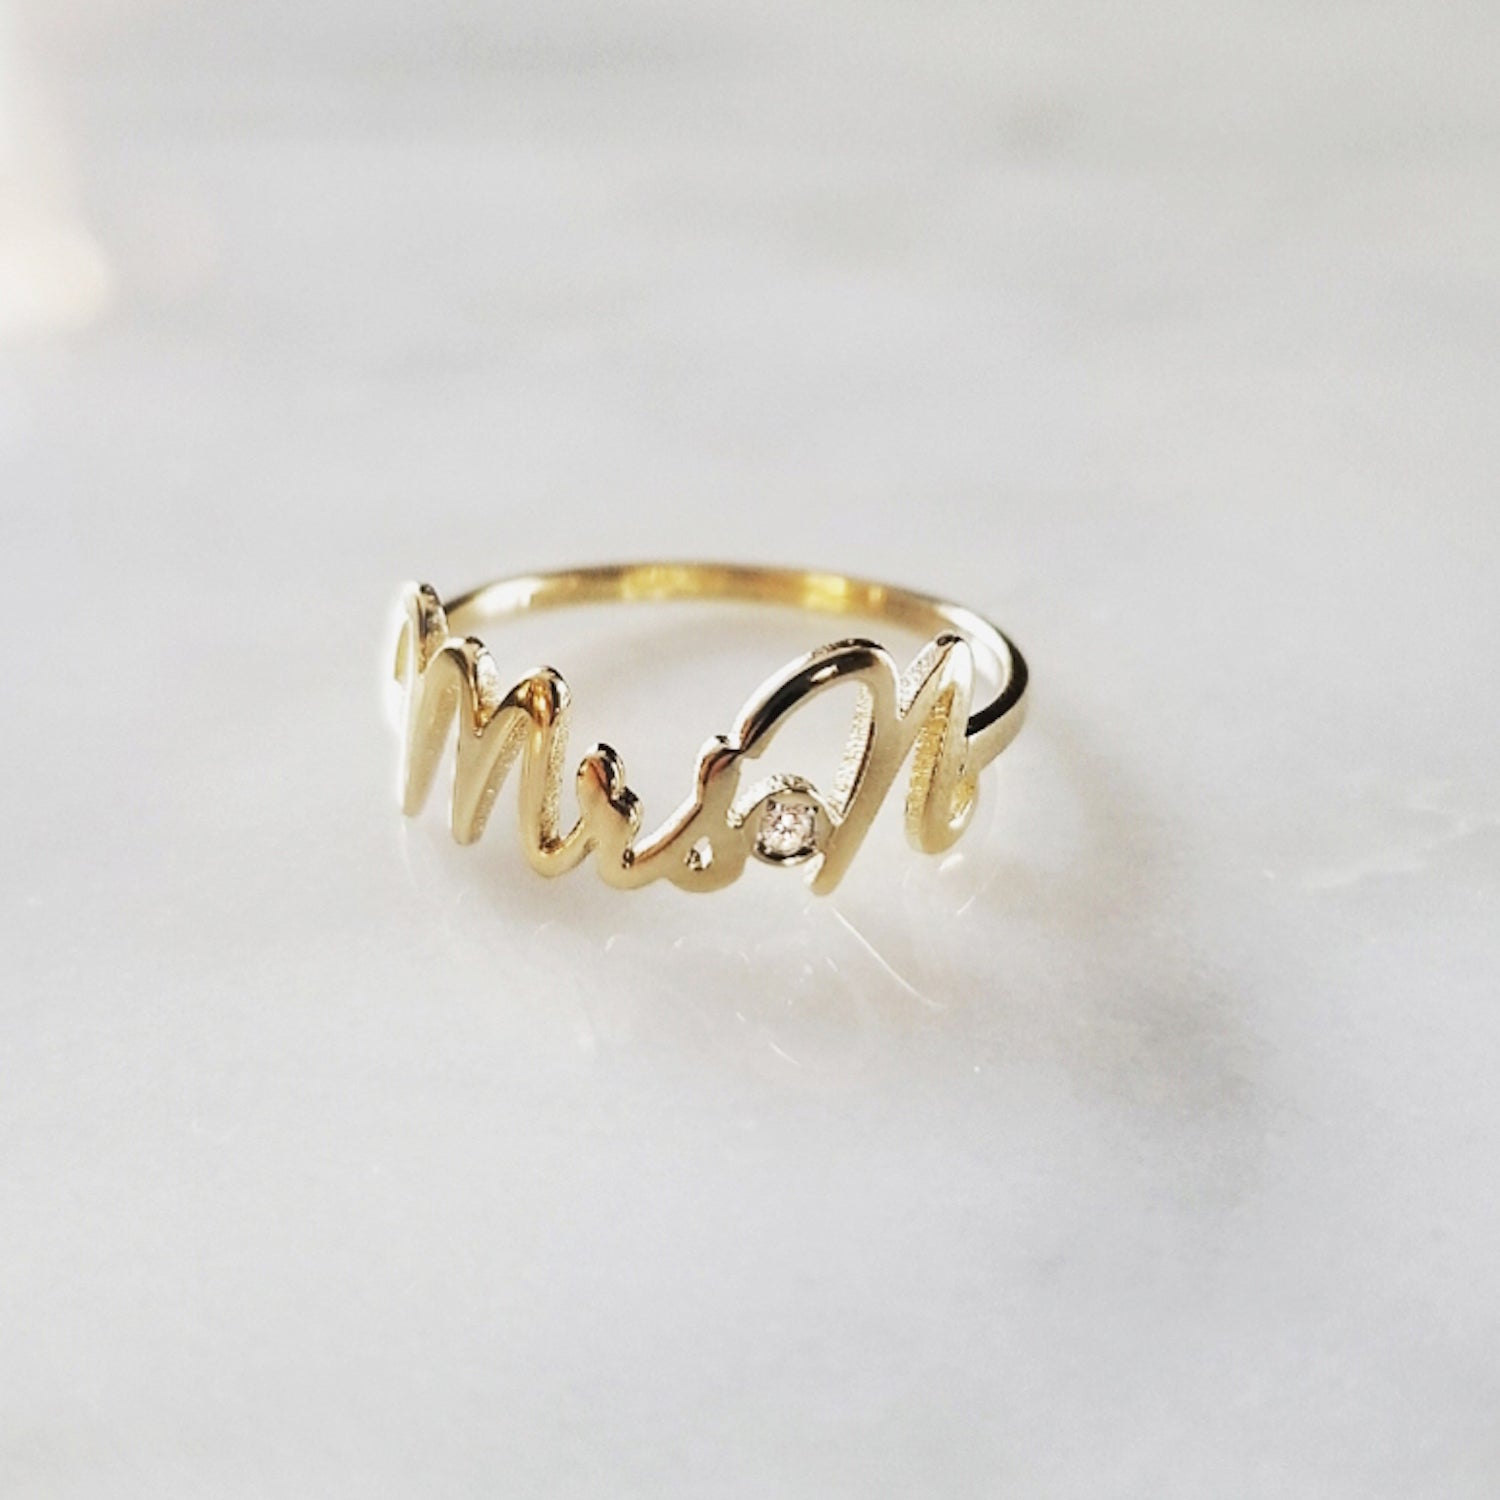 Name Ring , Gold Name Ring , Dainty Gold Name Ring , Personalized Jewelry ,  Name Jewelry , Silver Name Ring, Mothers Day Gift - Etsy